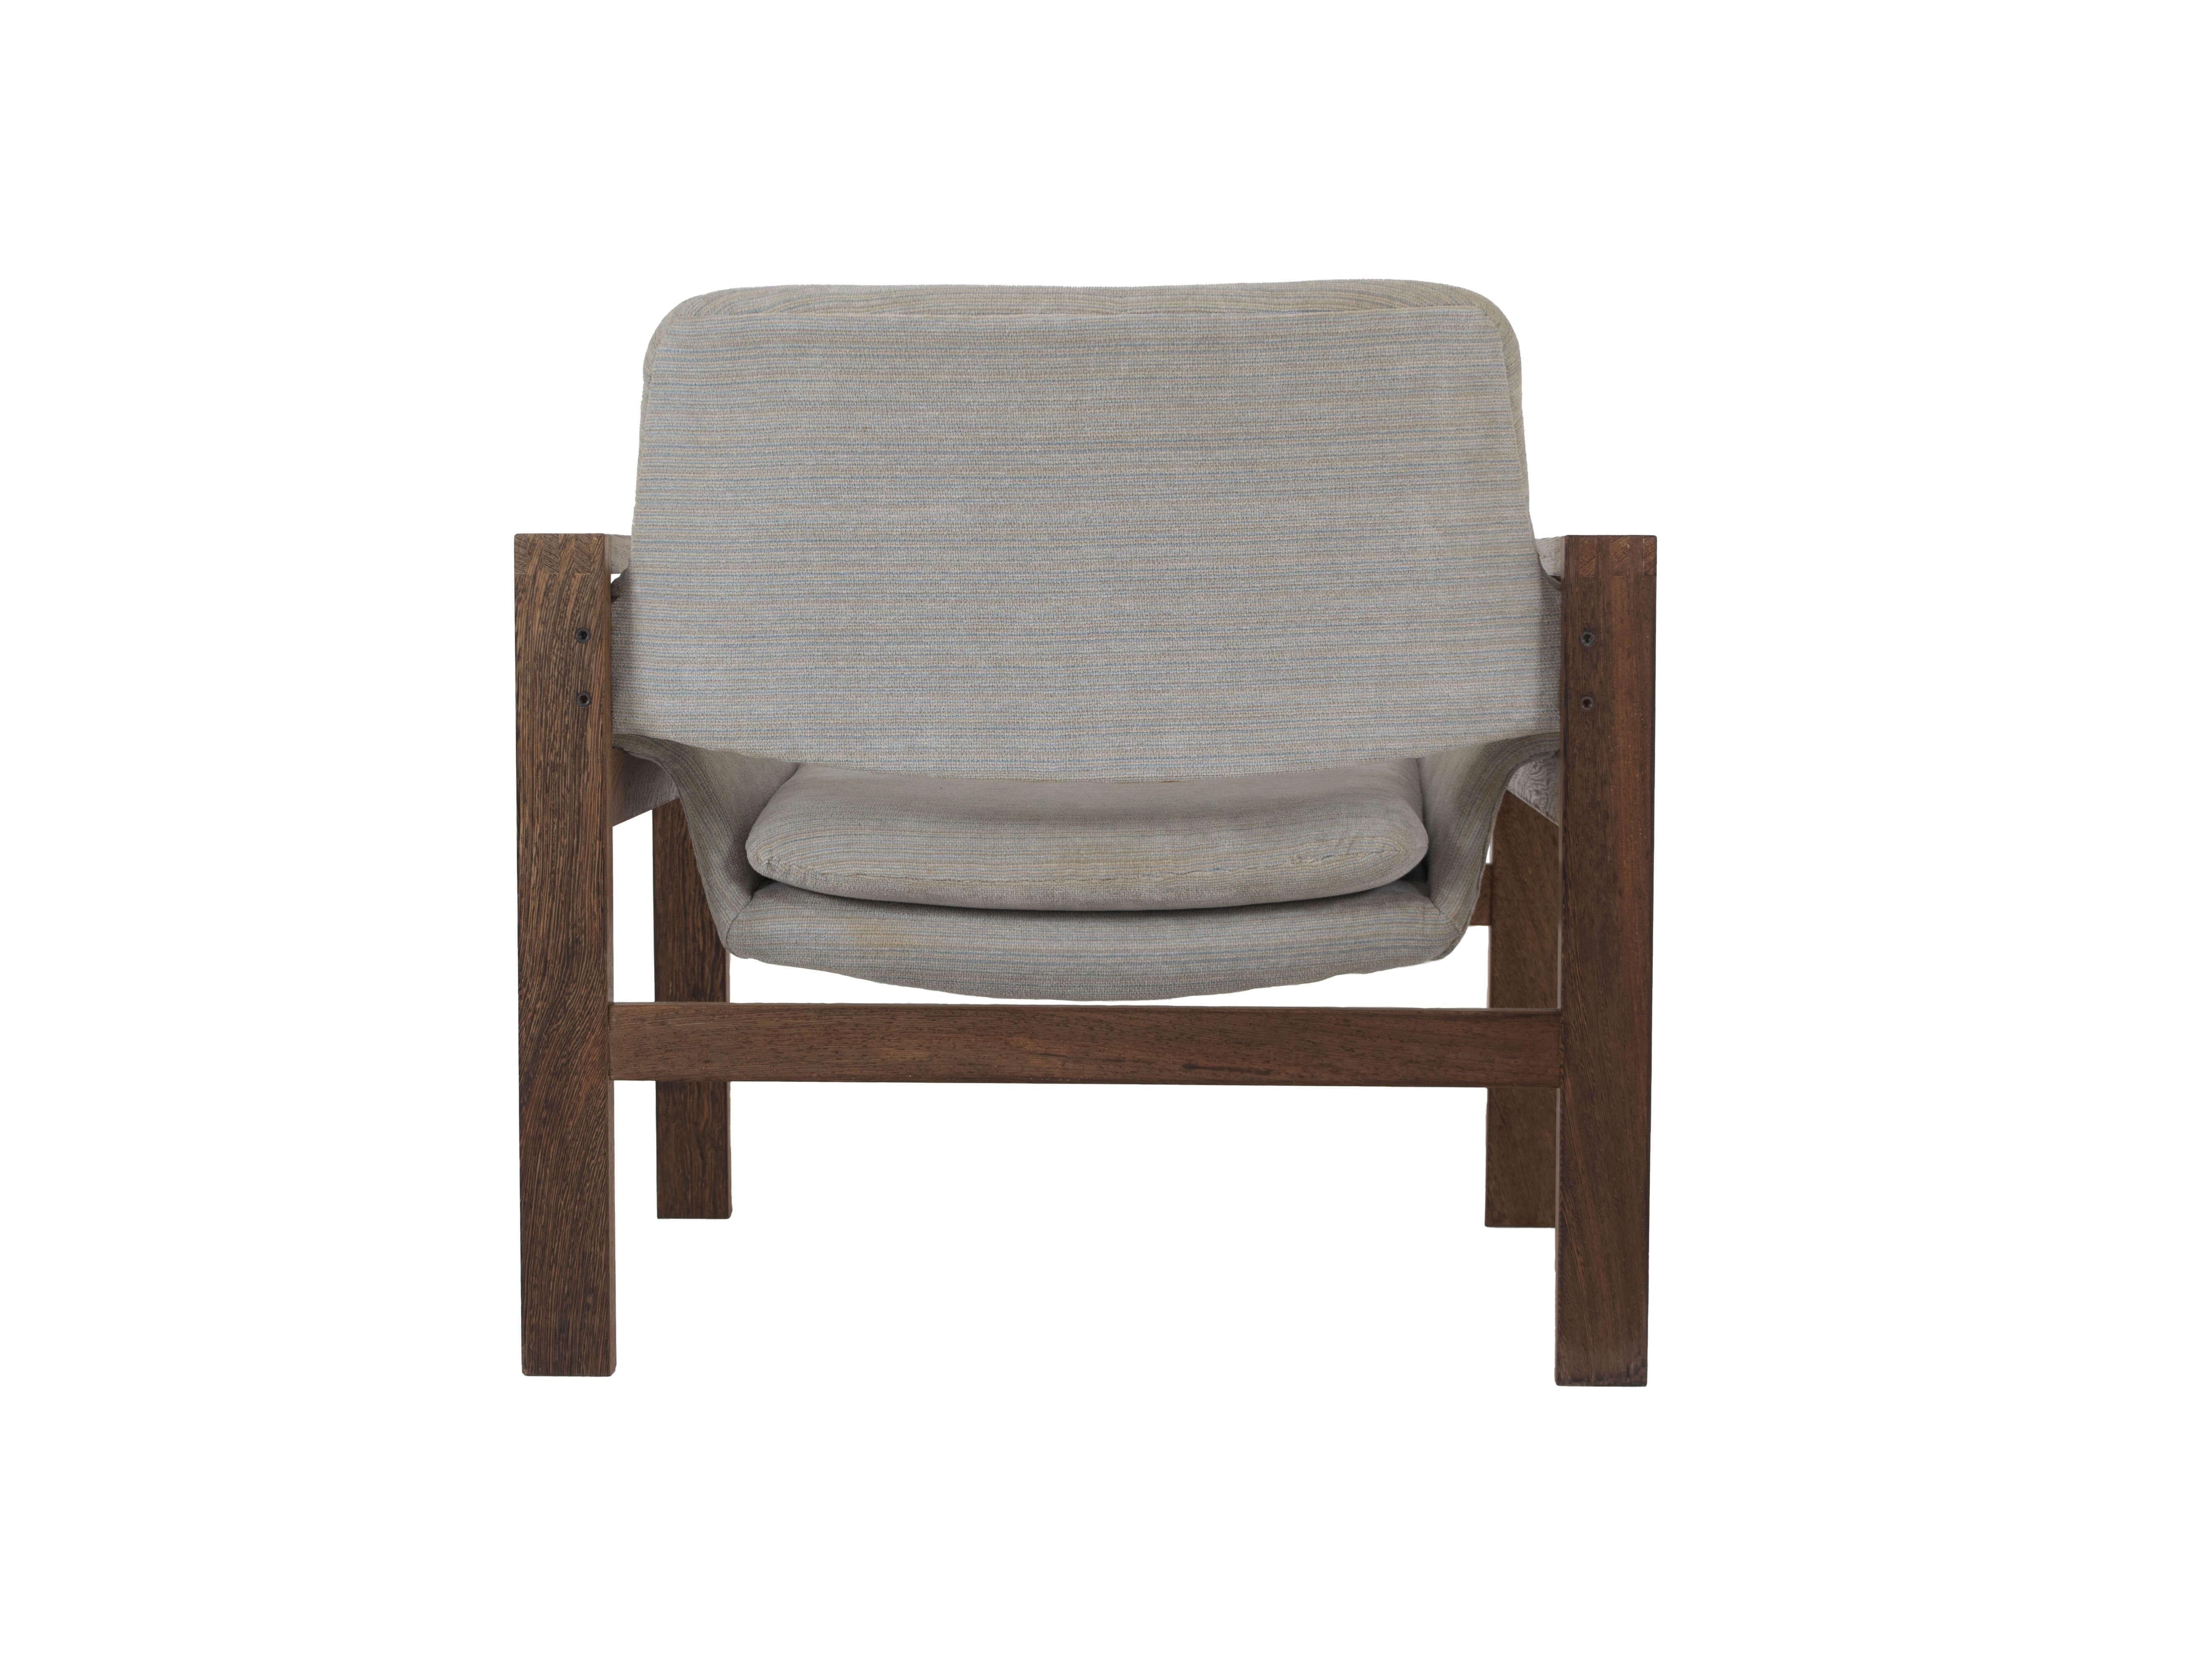 Late 20th Century Arm Chair Attributed to Martin Visser 't Spectrum, The Netherlands For Sale